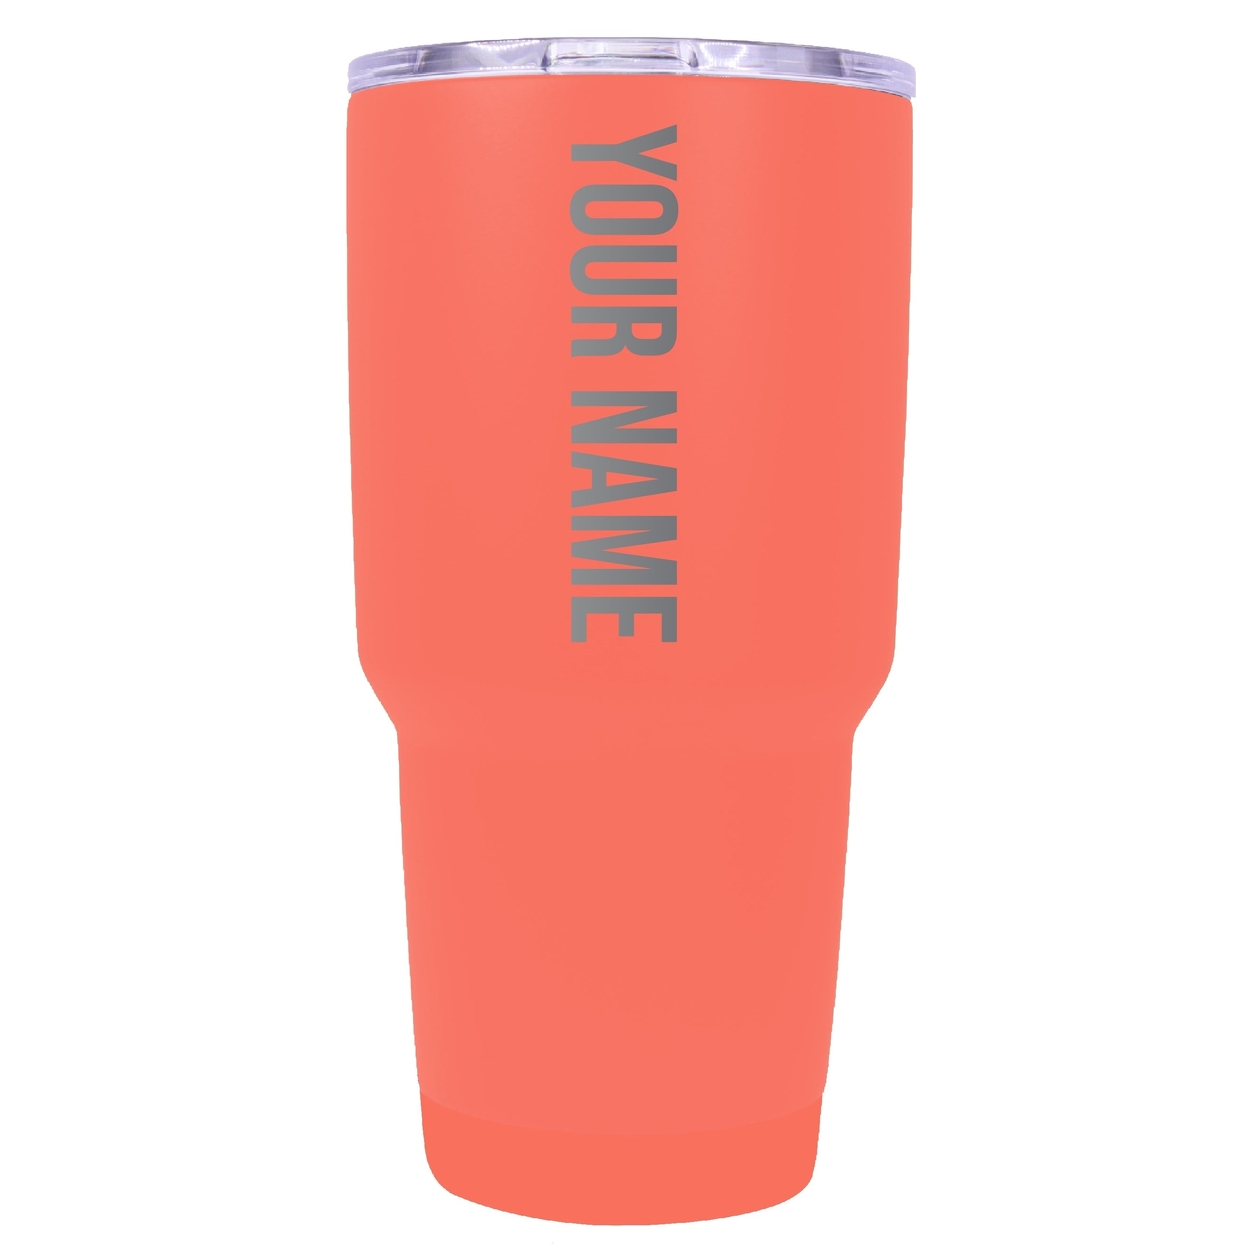 Customizable Laser Etched 24 Oz Insulated Stainless Steel Tumbler Personalized With Custom Name Or Message - Coral, 2 Pack